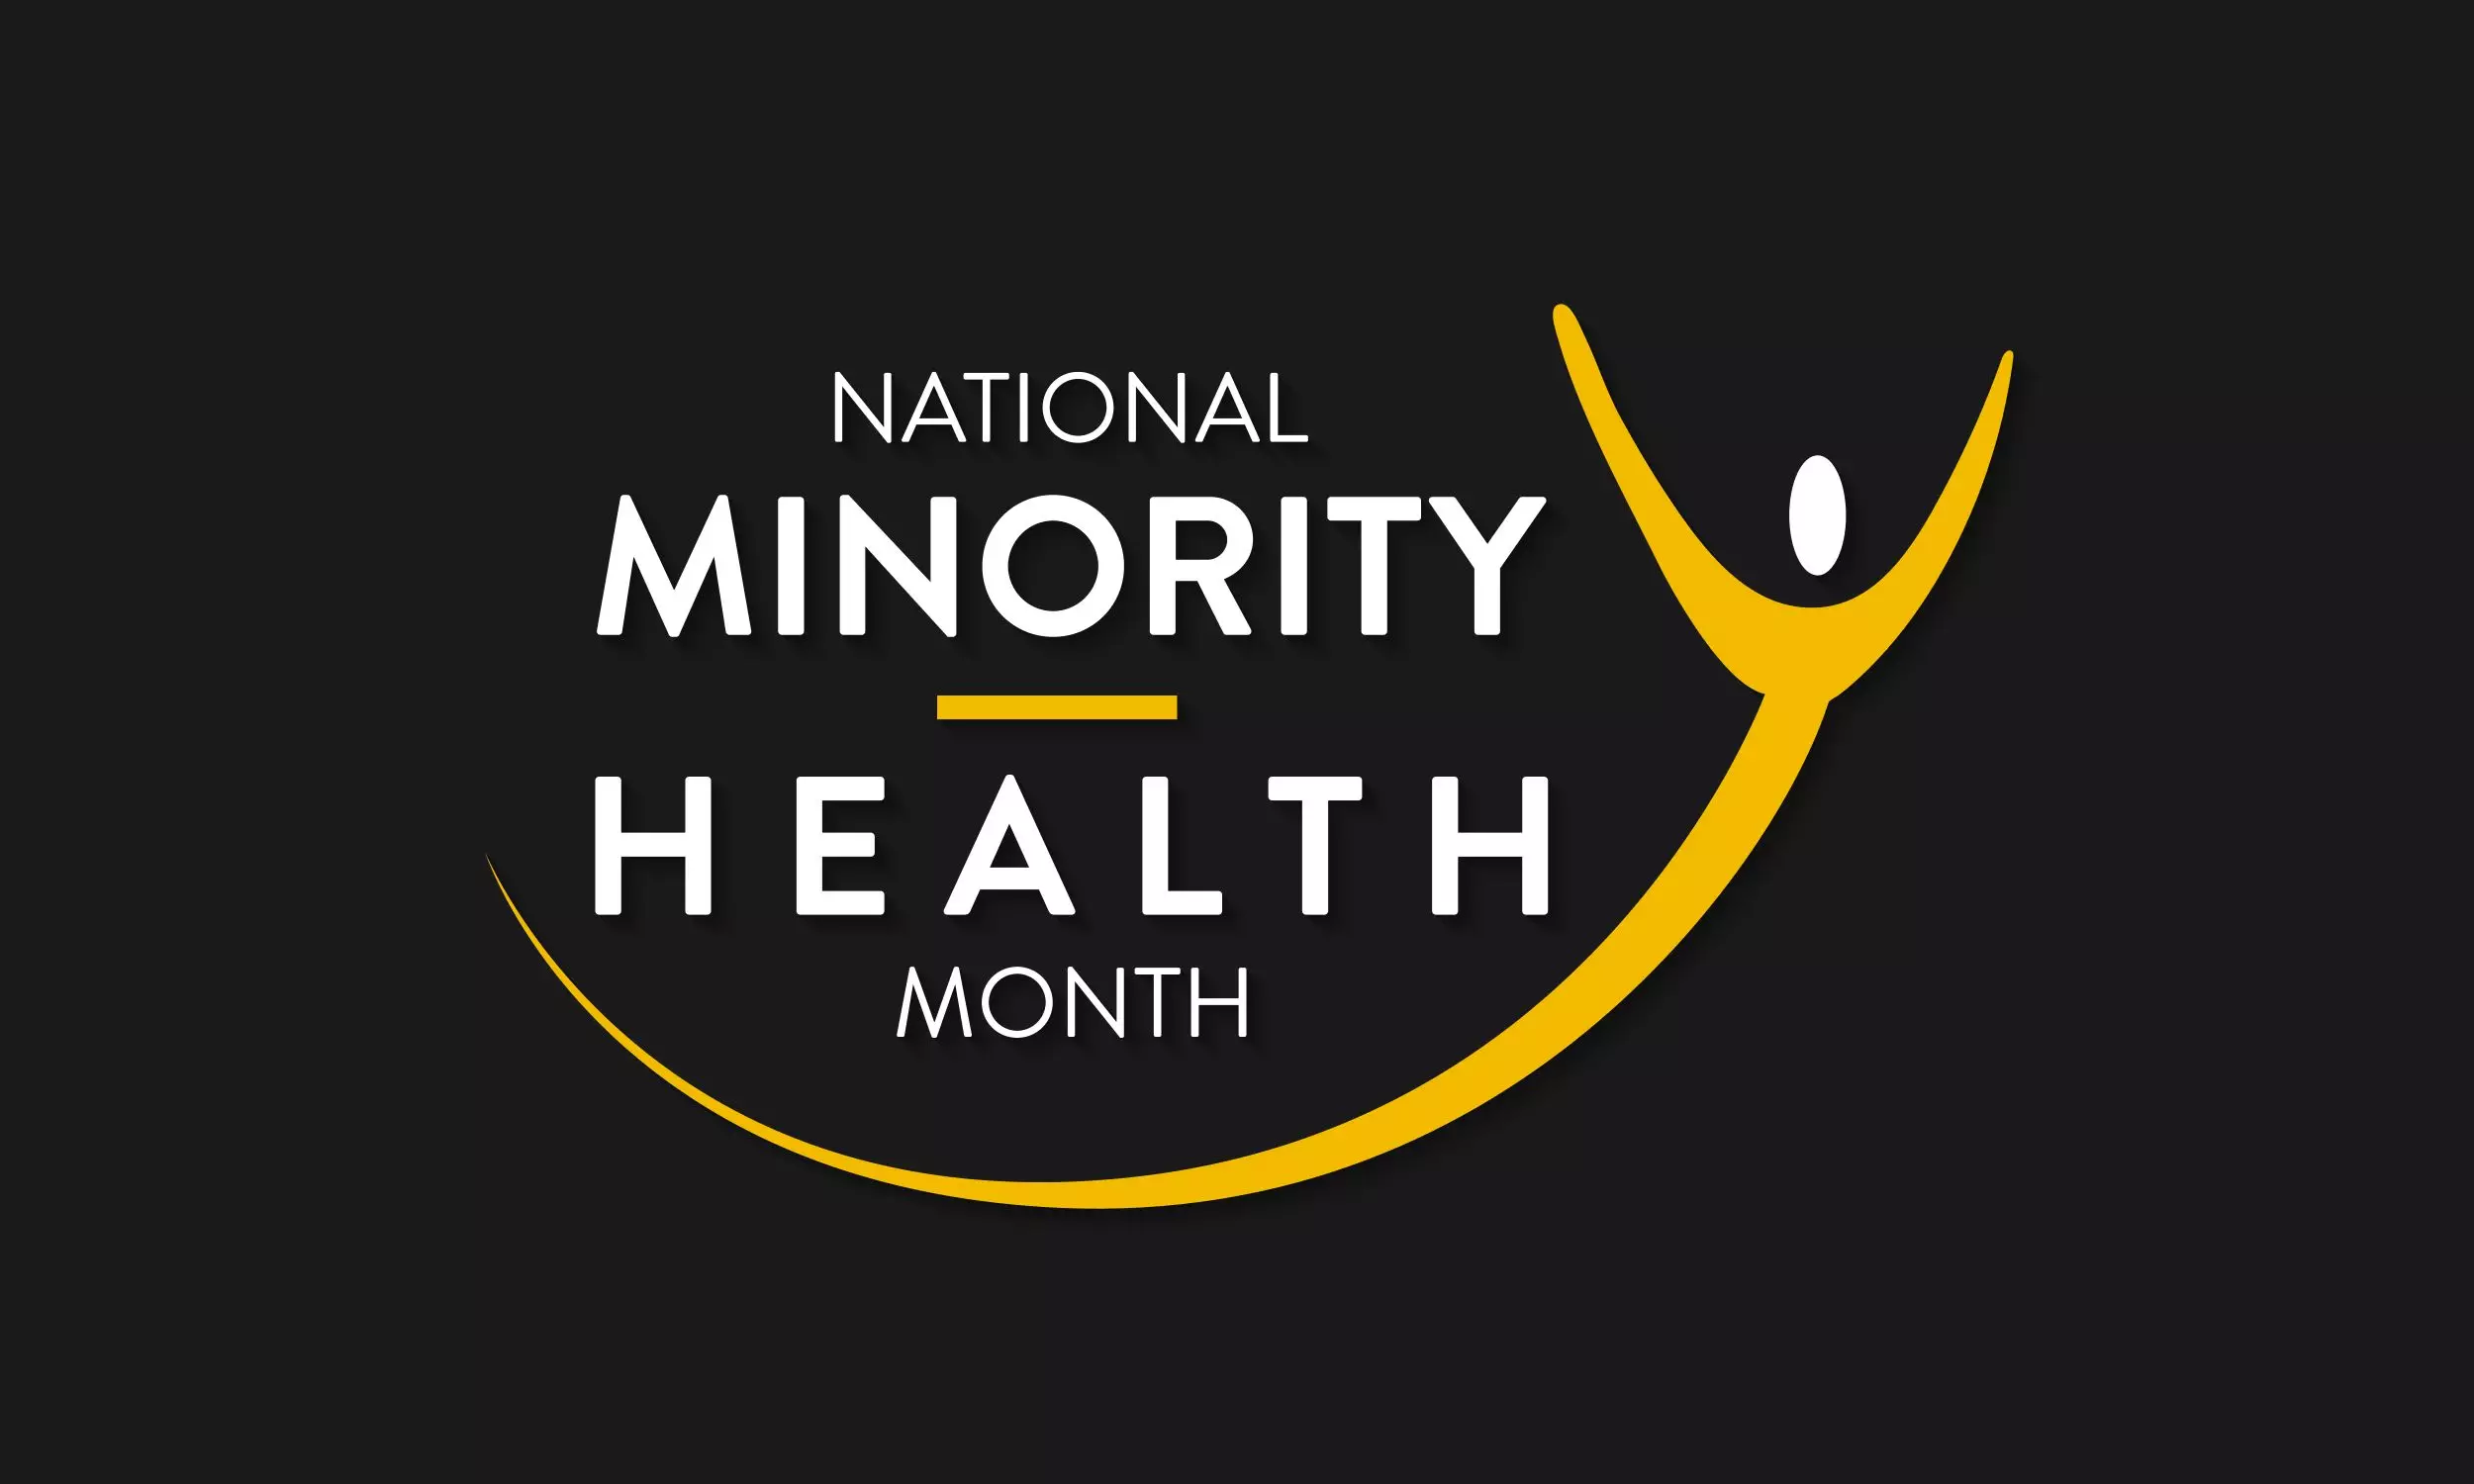 Take Action During National Minority Health Month